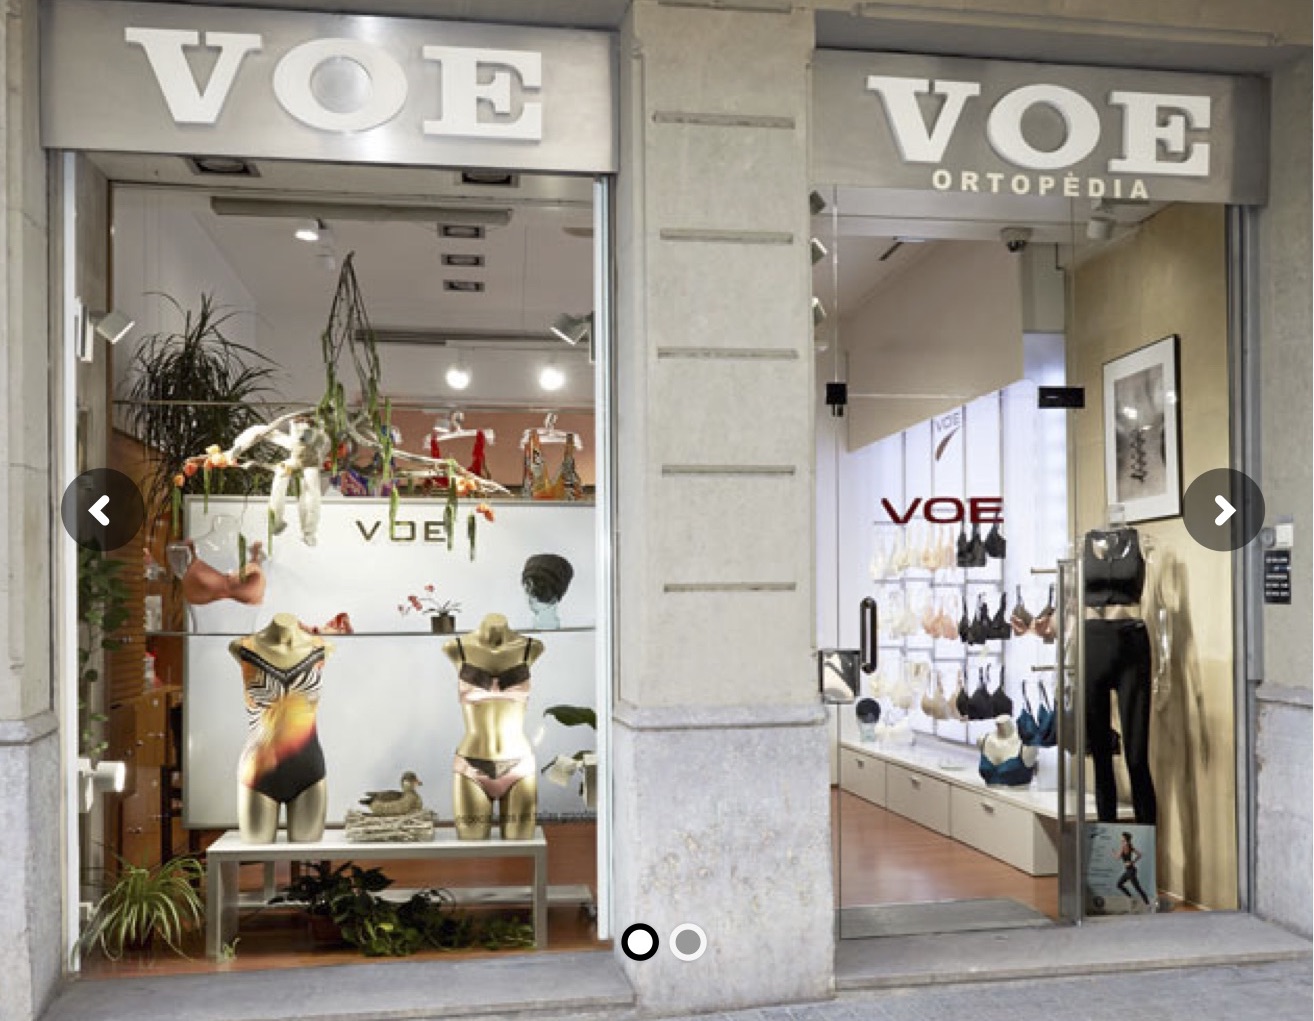 Take a peek at the VOE store in Barcelona!